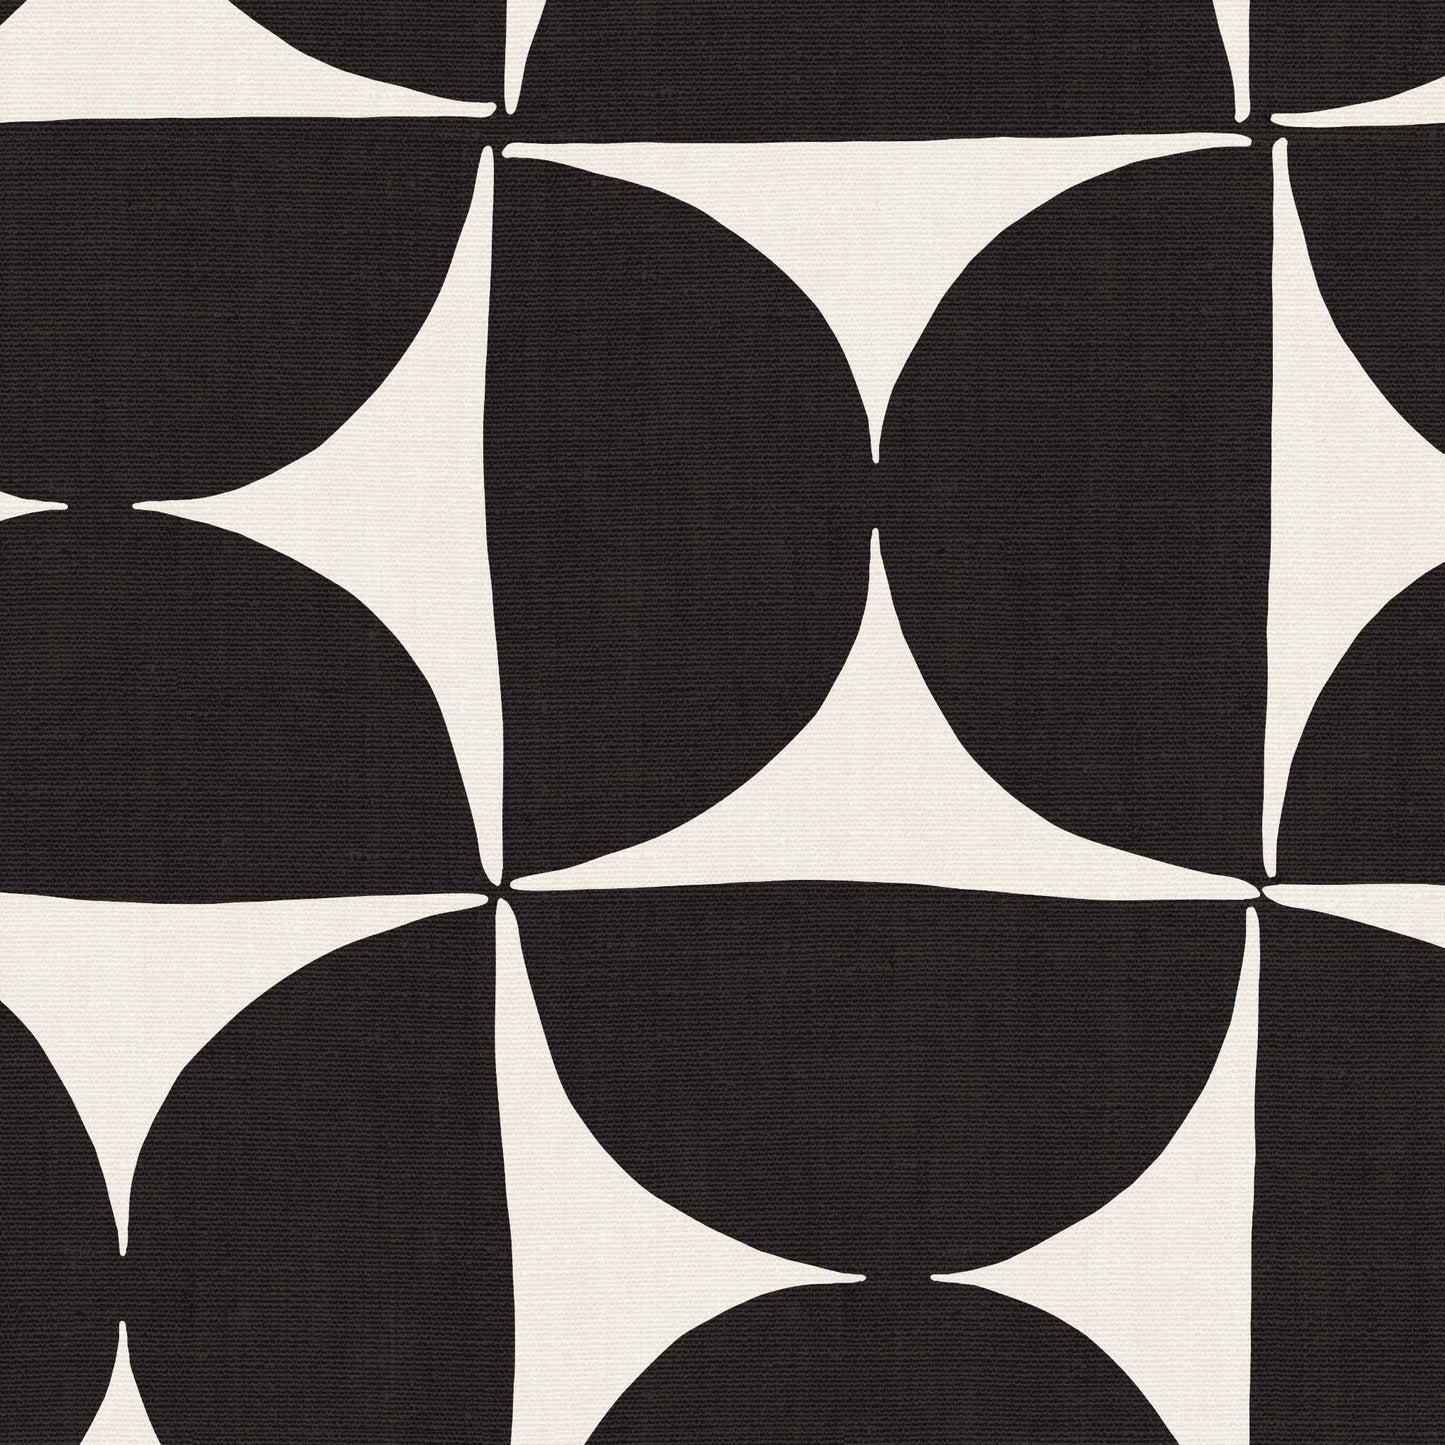 Get yourself these stylish Half Circle Tile Wallpapers for a unique wall decor solution. With its charcoal on cream design, these geometric wallpapers will easily liven up any room, making it look modern and chic.